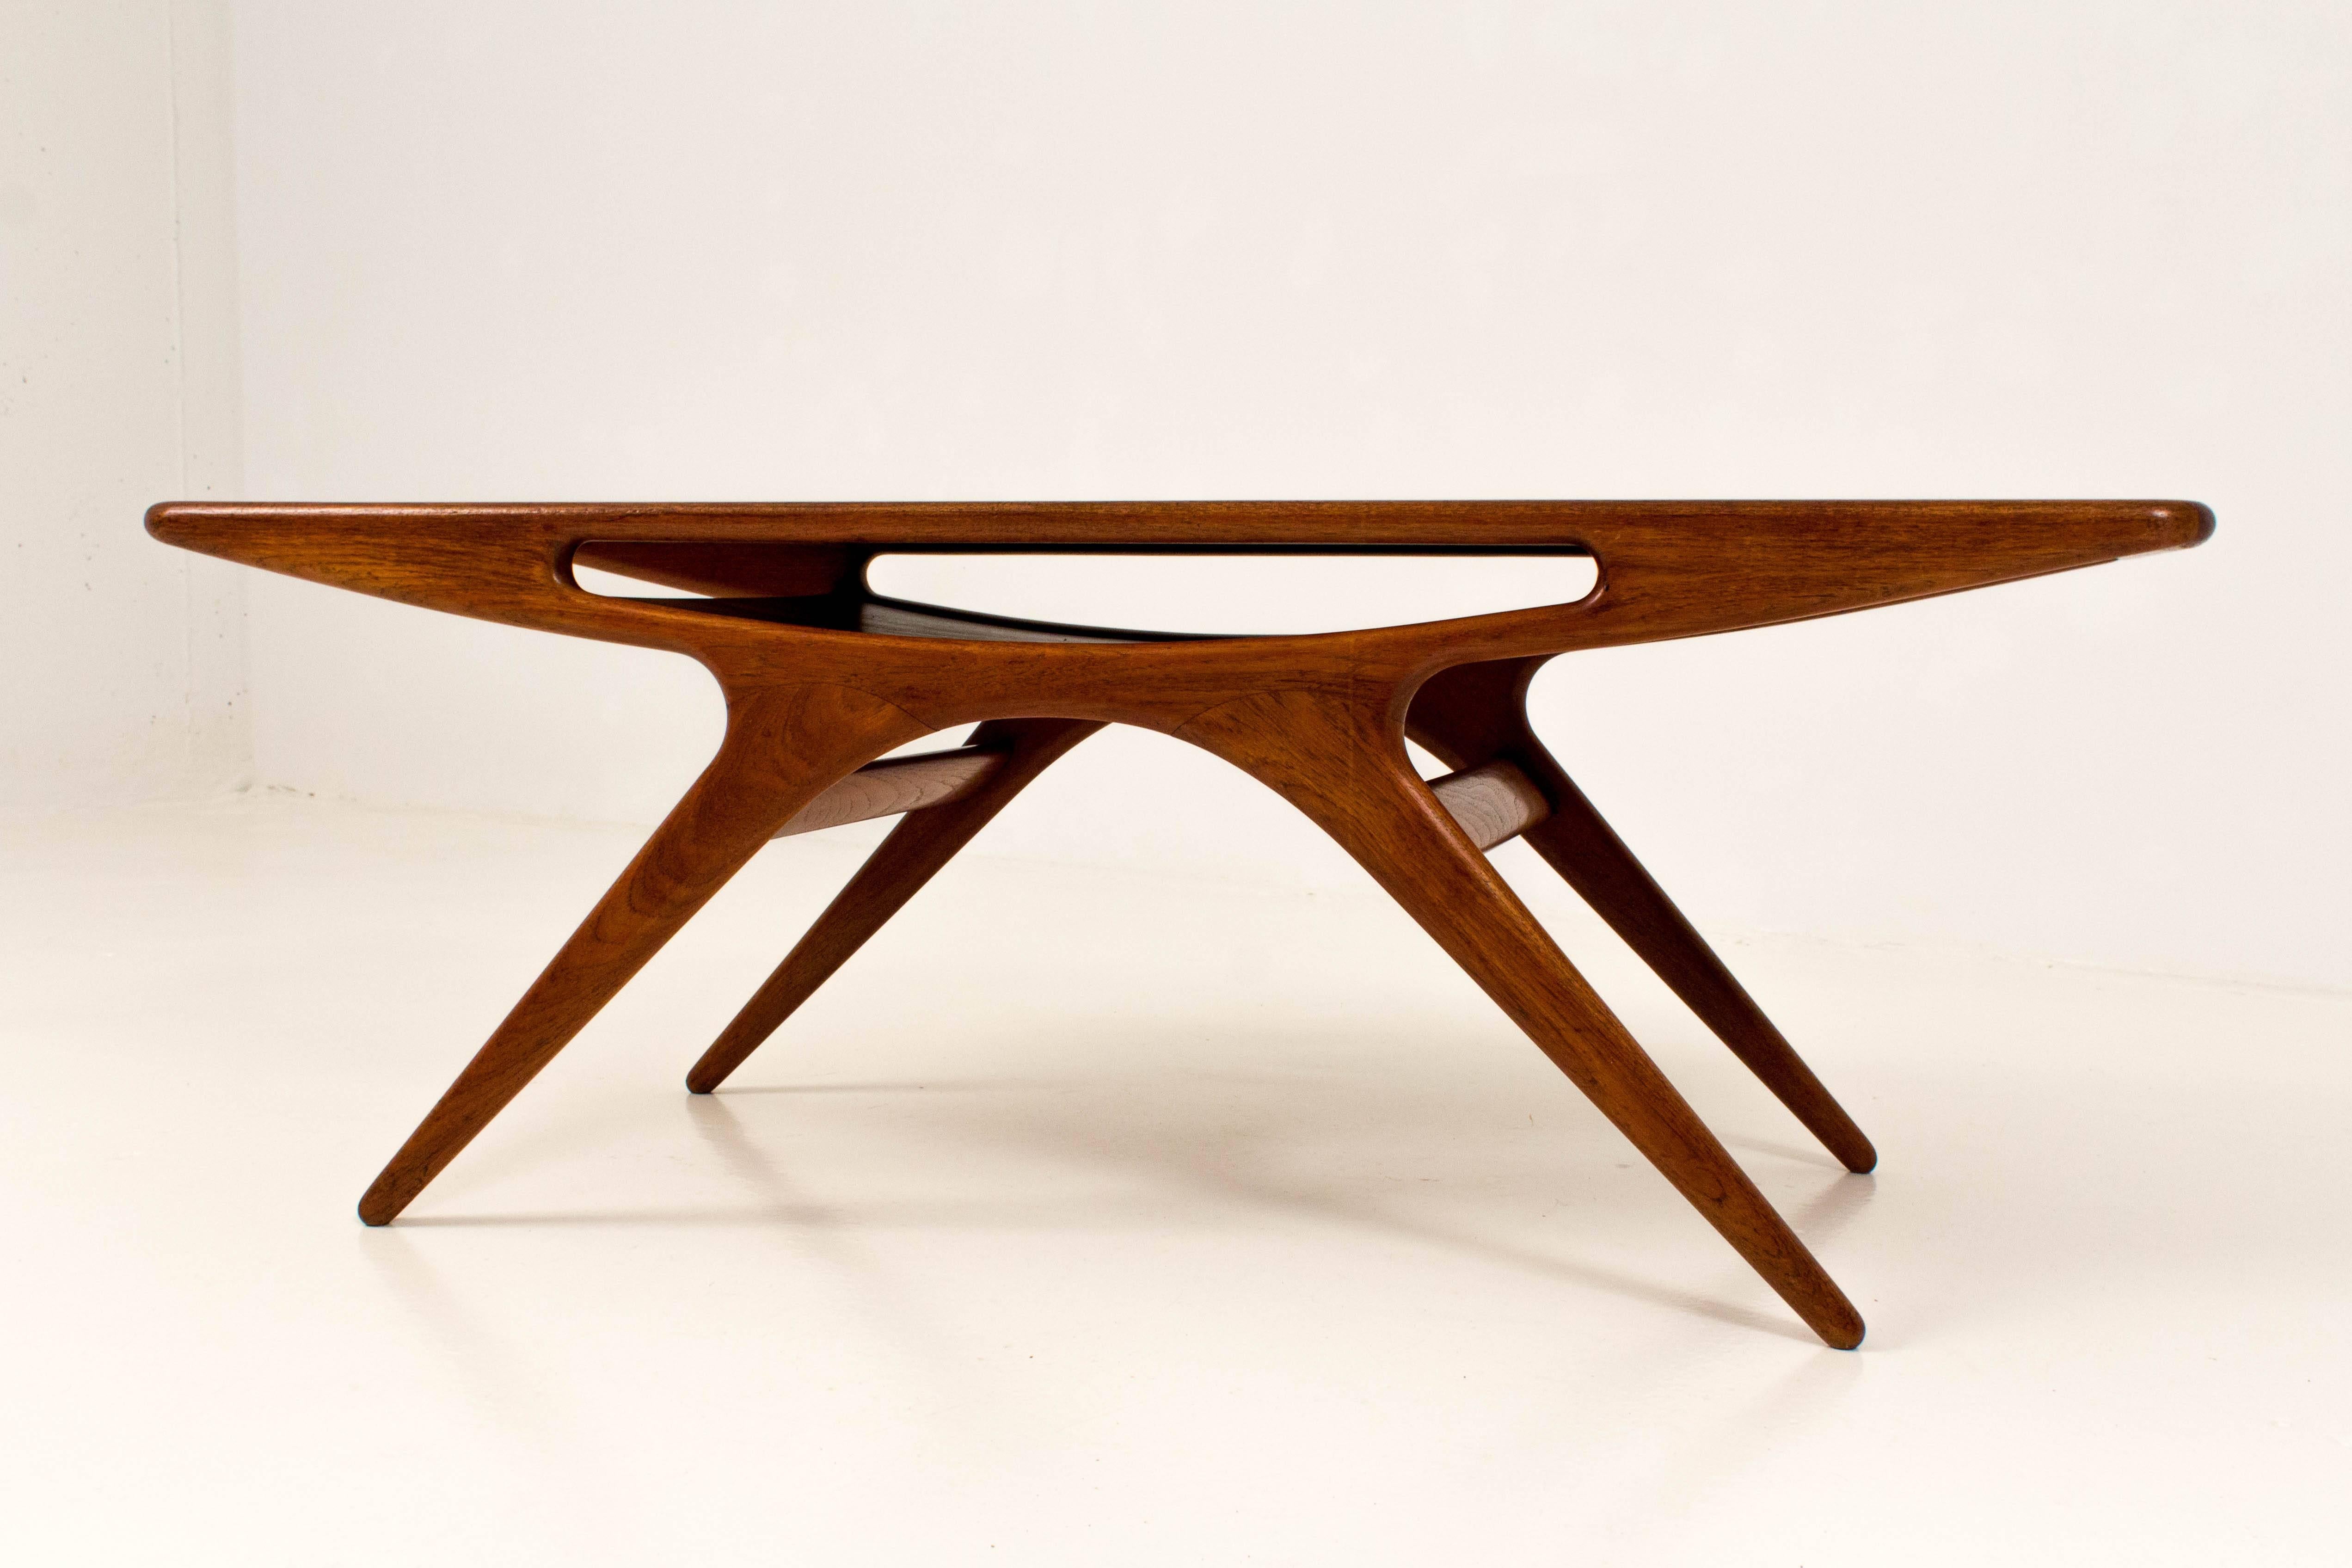 Iconic Smile teak coffee table by Johannes Andersen for CFC Silkeborg, Denmark, 1957.
The magazine shelf is moulded into the table, giving it a smile effect.
In very good condition with minor wear consistent with age and use,
preserving a